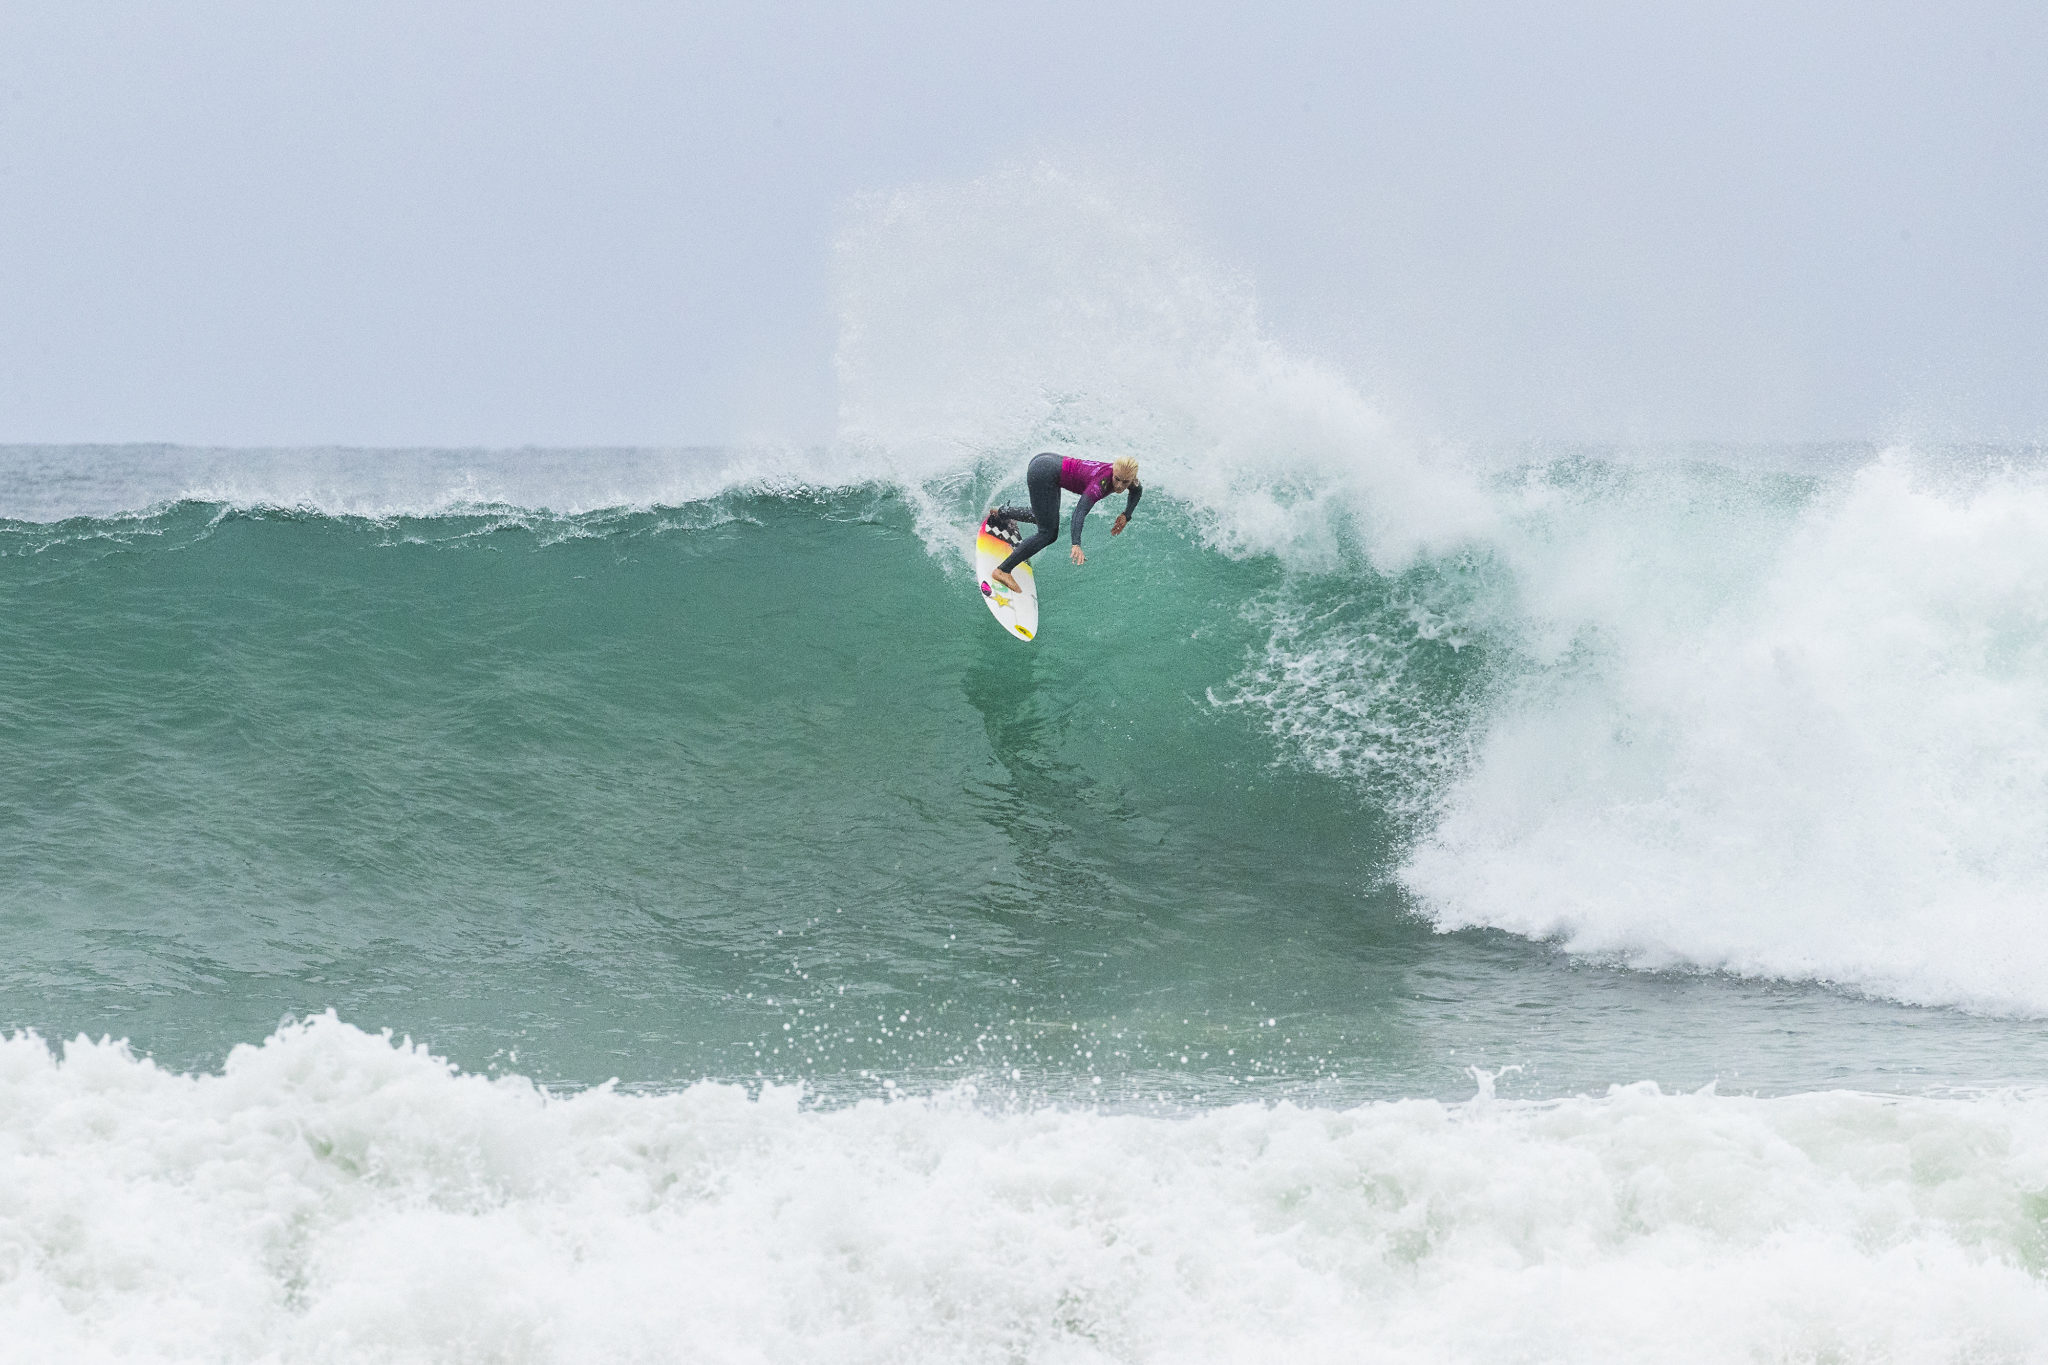 Tatiana Weston-Webb (HAW) advances to the Quarterfinals of the 2018 Women's Corona Open J-Bay after winning Heat 4 of Round 3 at Supertubes, Jeffreys Bay, South Africa.